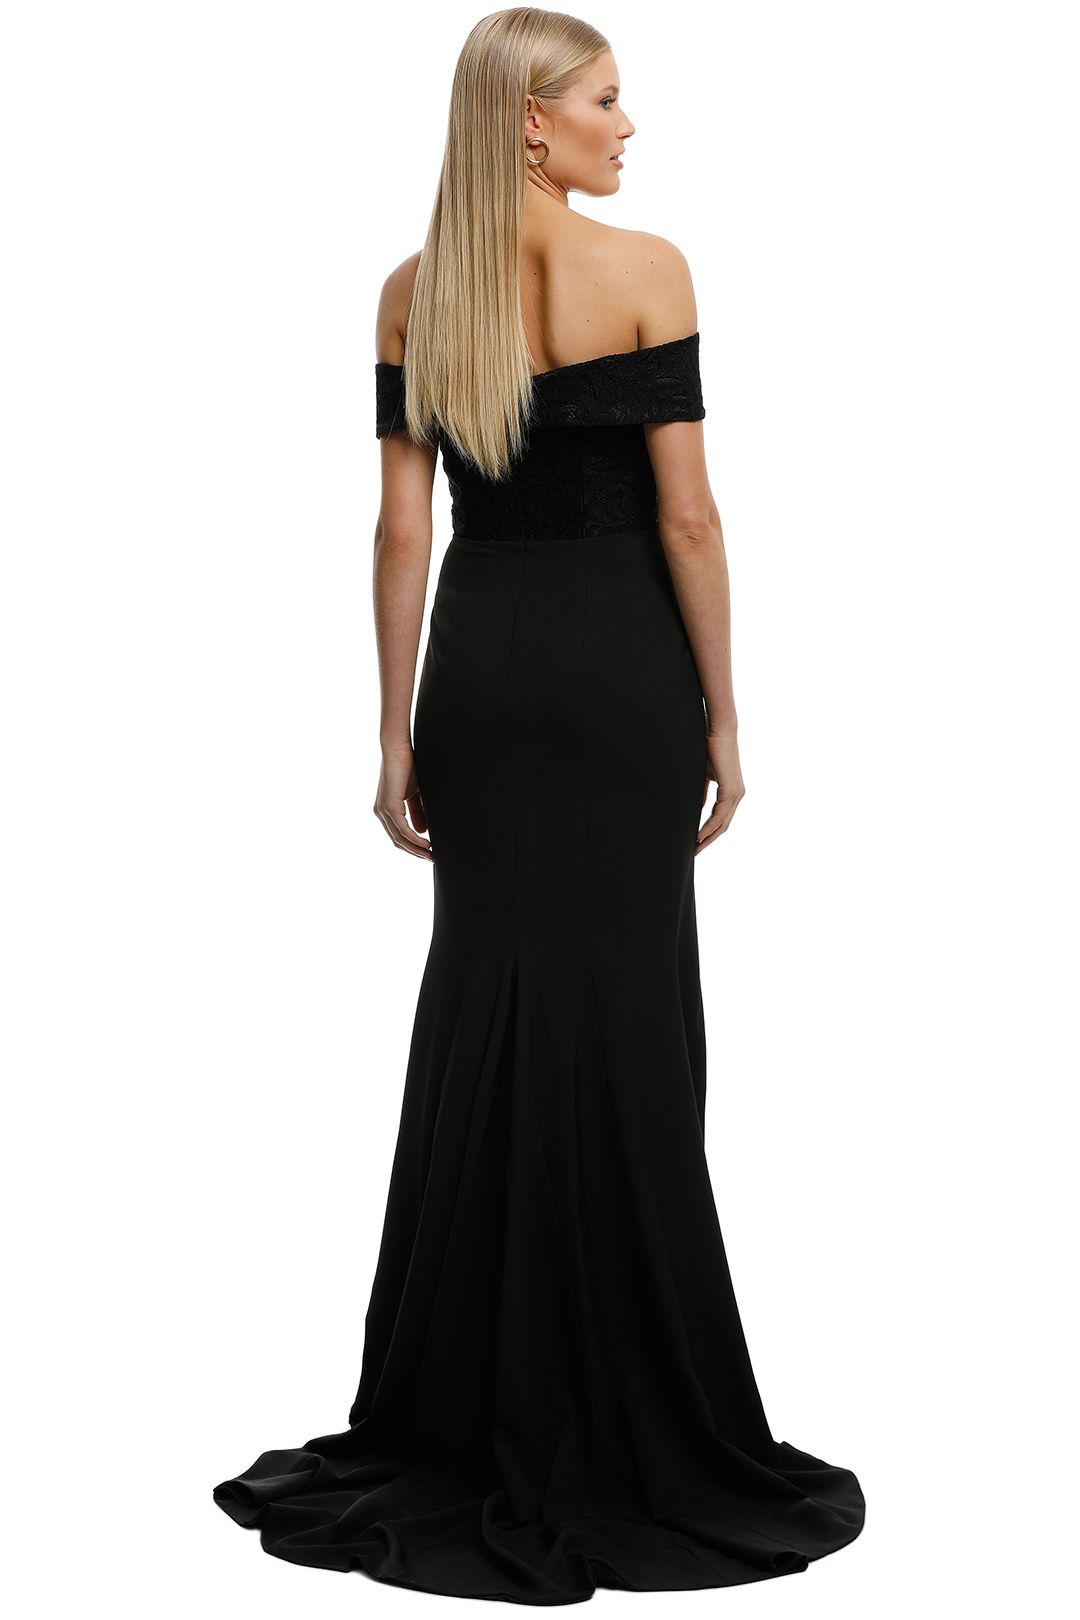 Samantha Rose-Gia Lace Bodice Gown-Black-Back